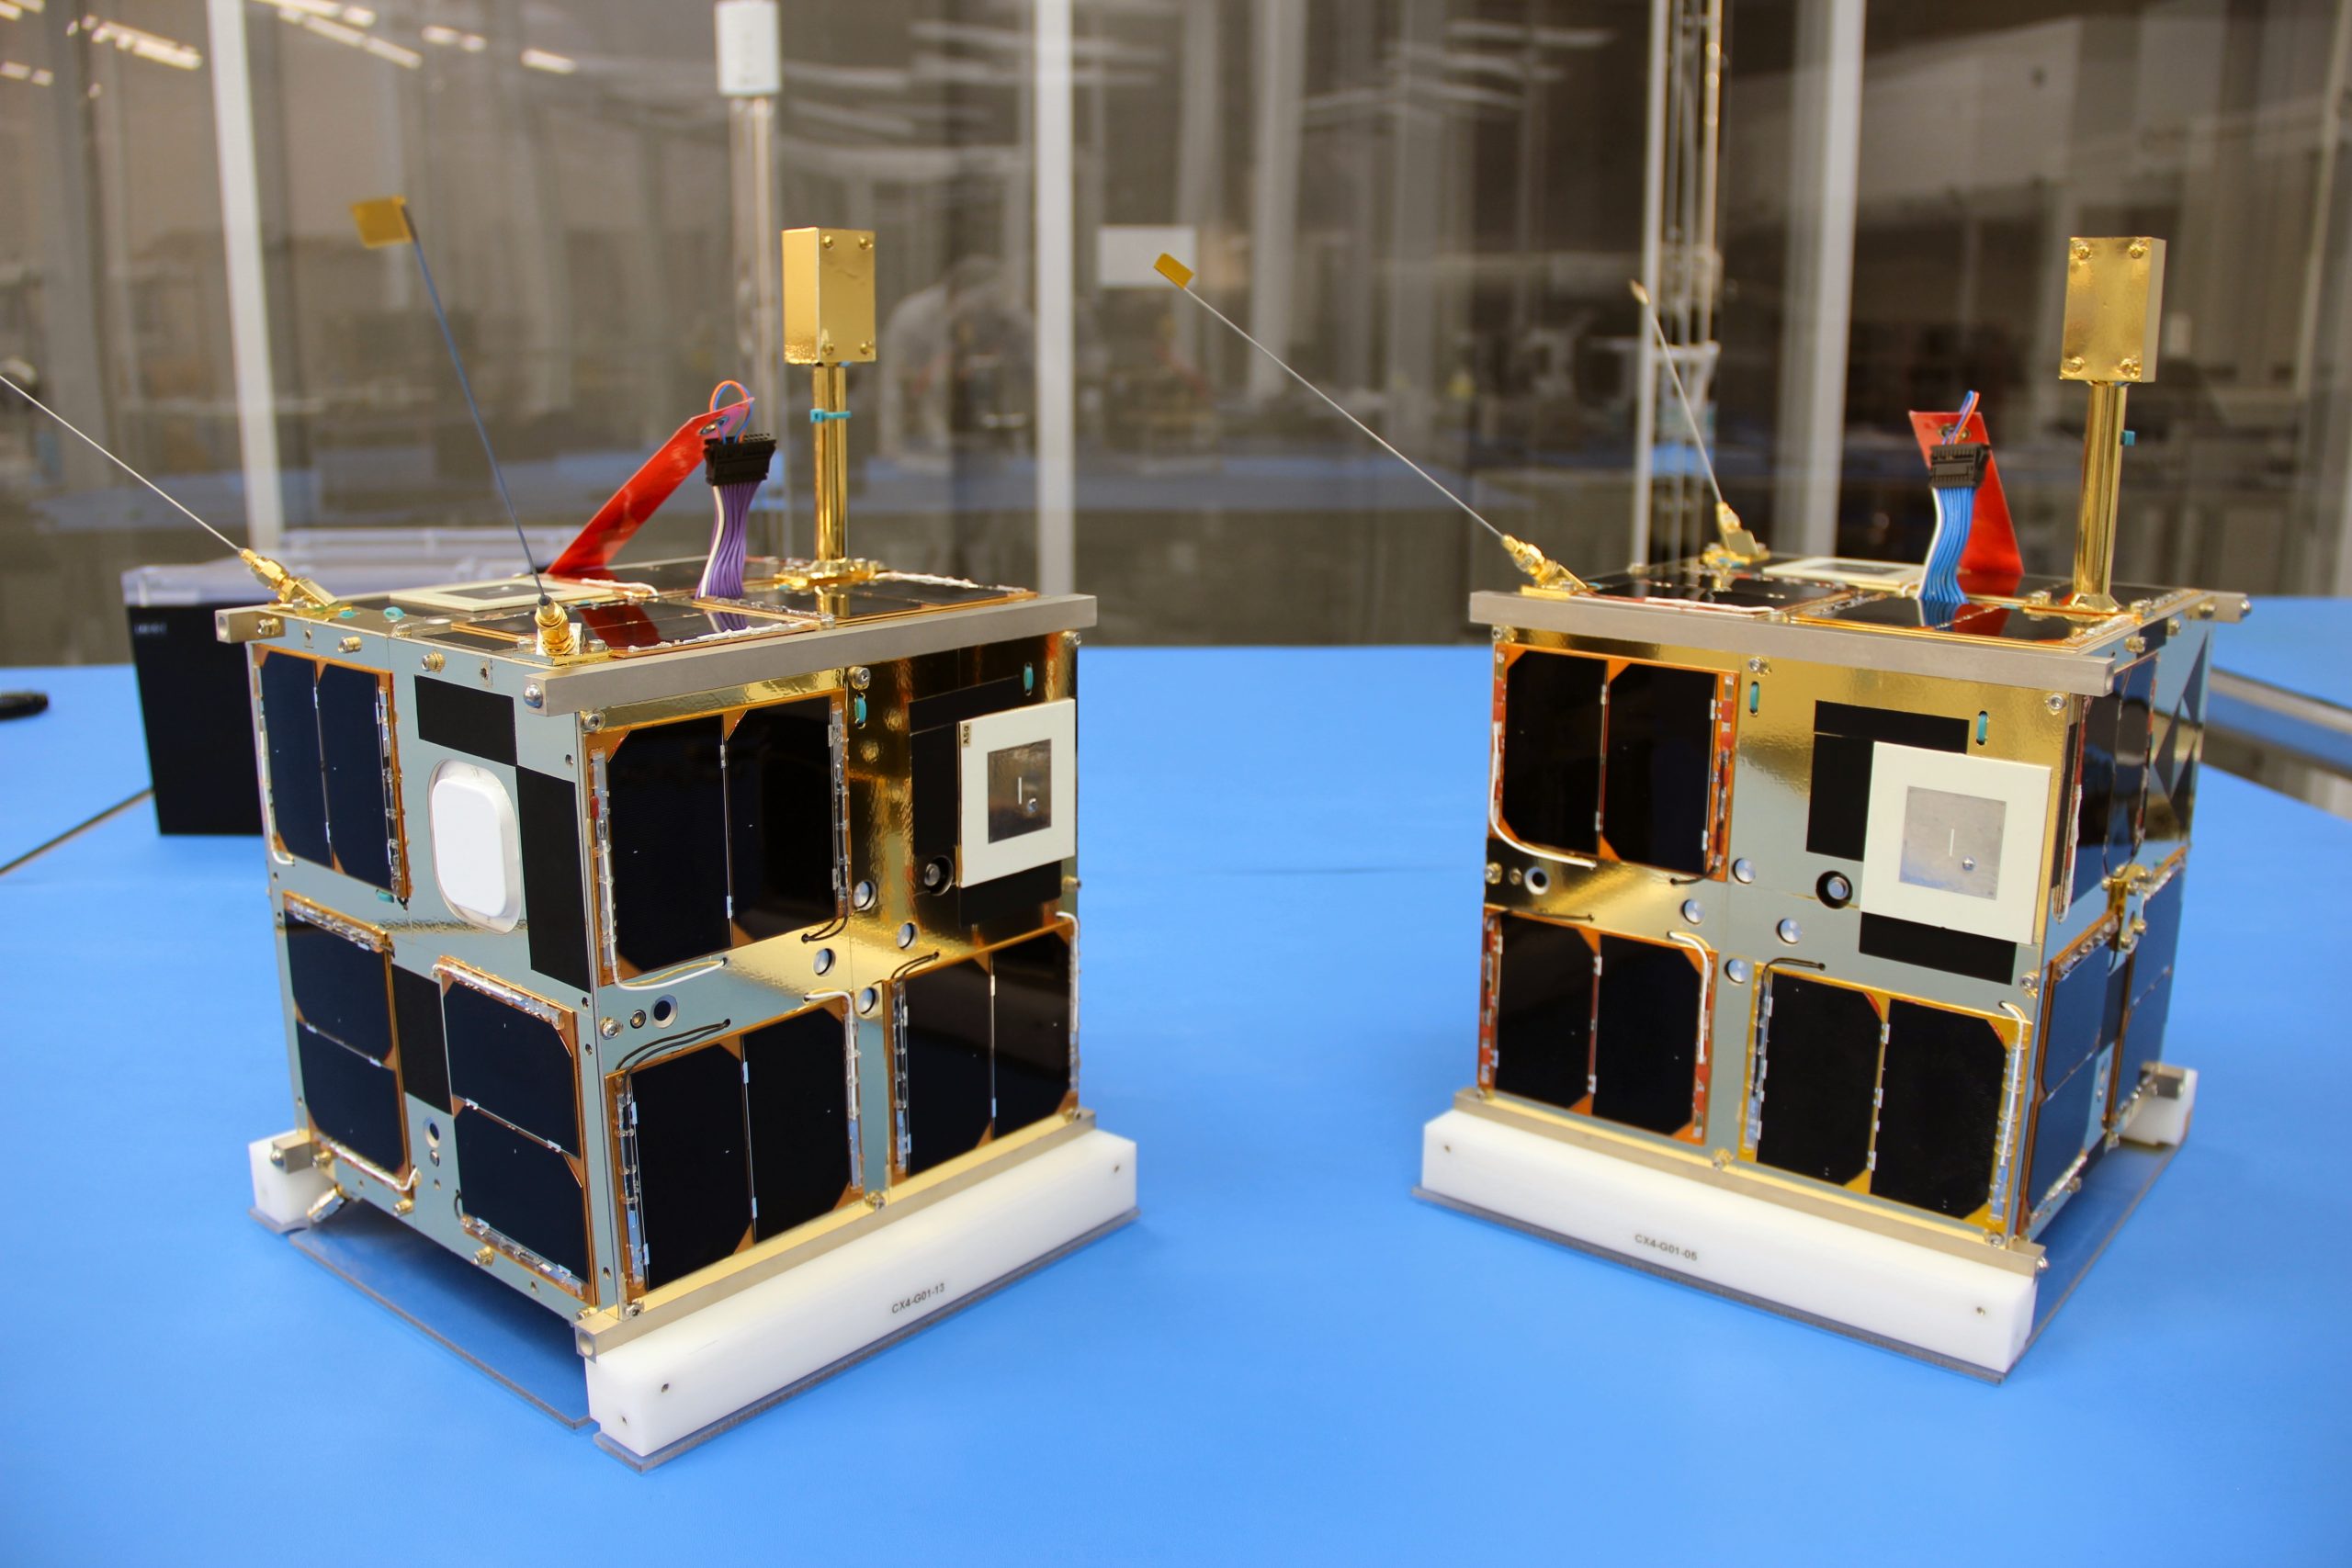 Two nanosatellites, 7 kg in size, sit on a blue table. 